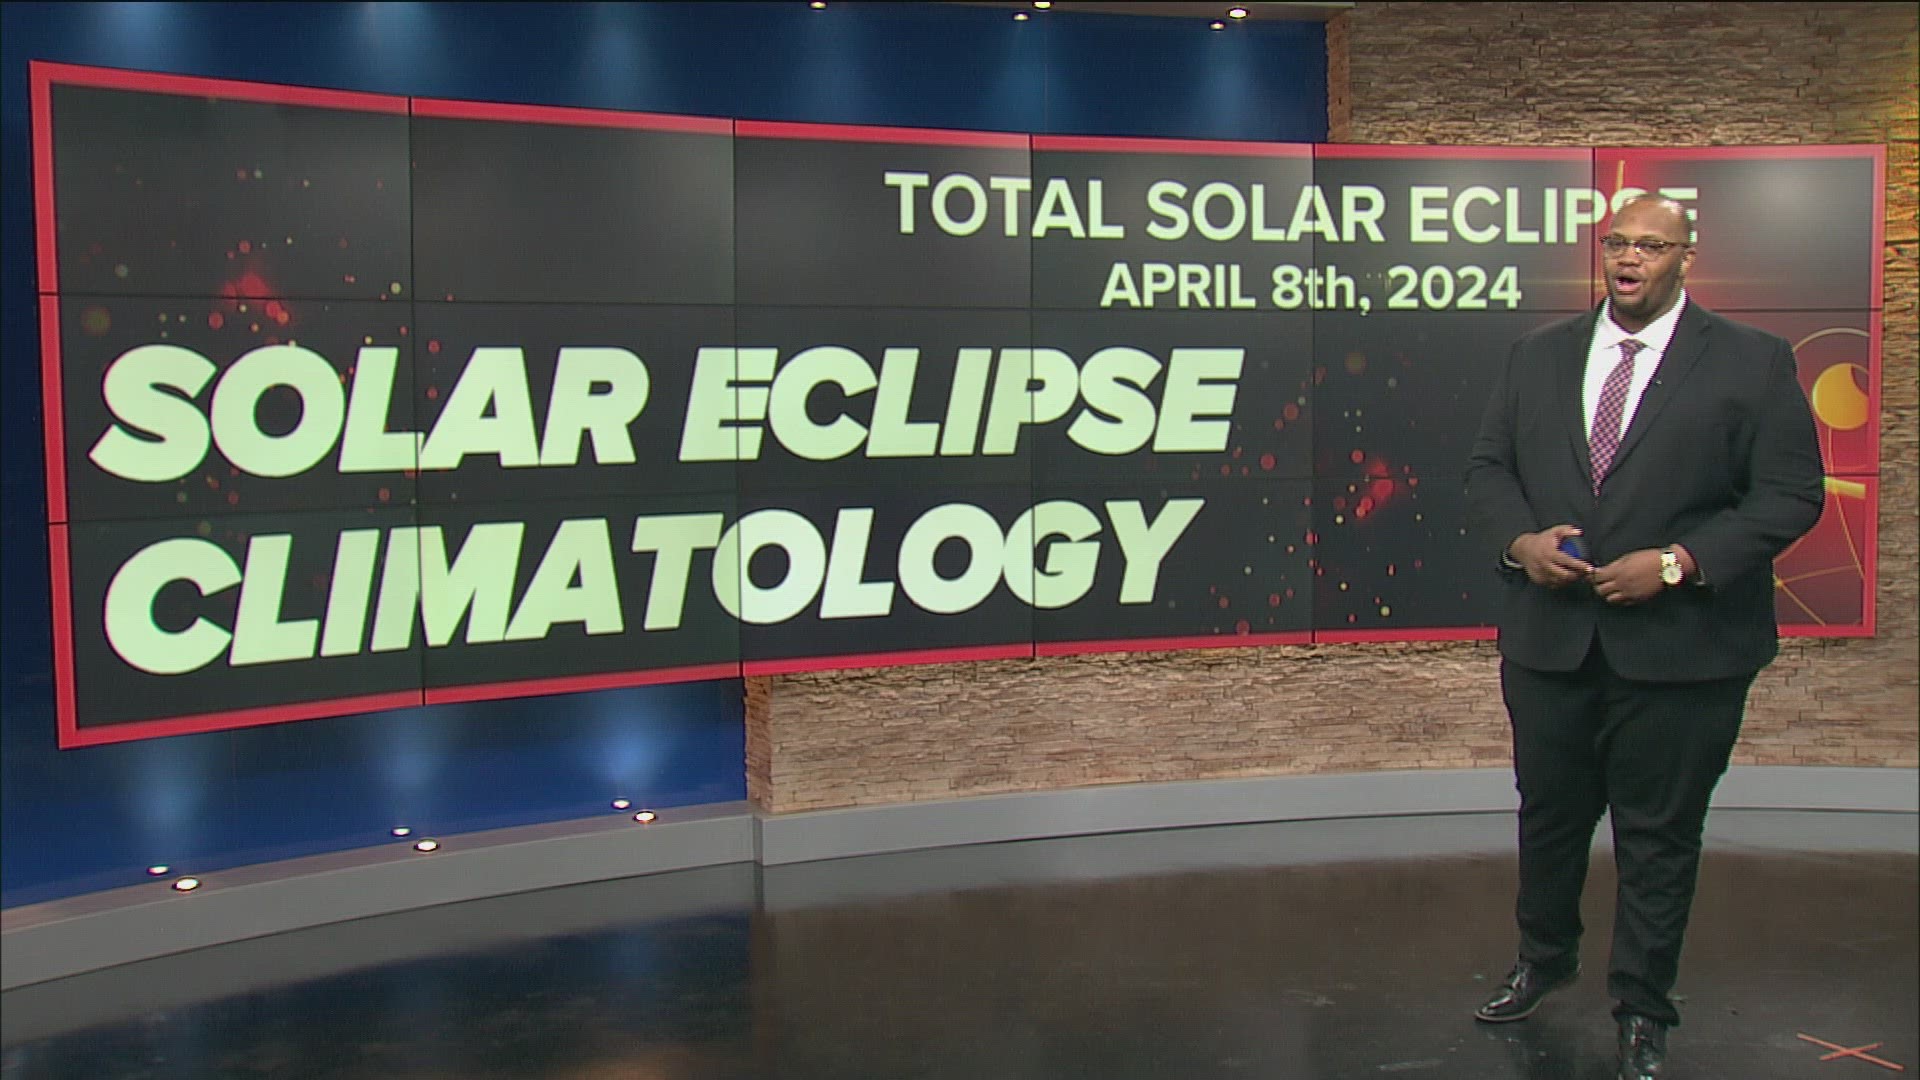 WTOL 11 Meteorologist Matt Willoughby explains the climatology of April and what we might be able to expect for the April 8, 2024 total solar eclipse.